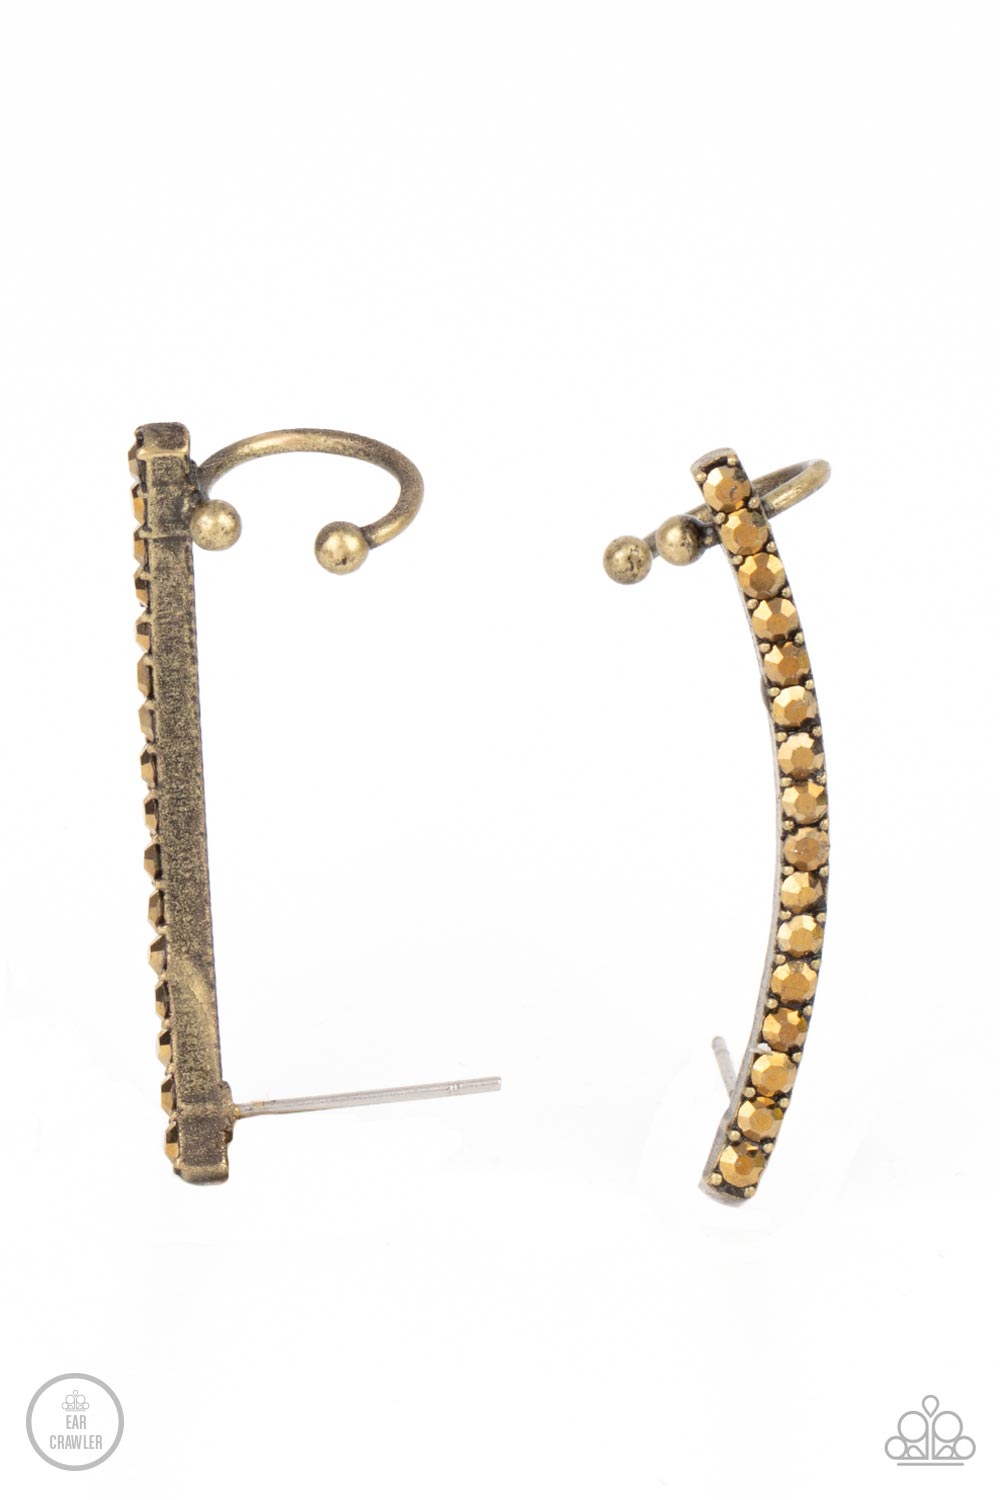 Paparazzi Jewelry & Accessories - Give Me The SWOOP - Brass Post Earring. Bling By Titia Boutique